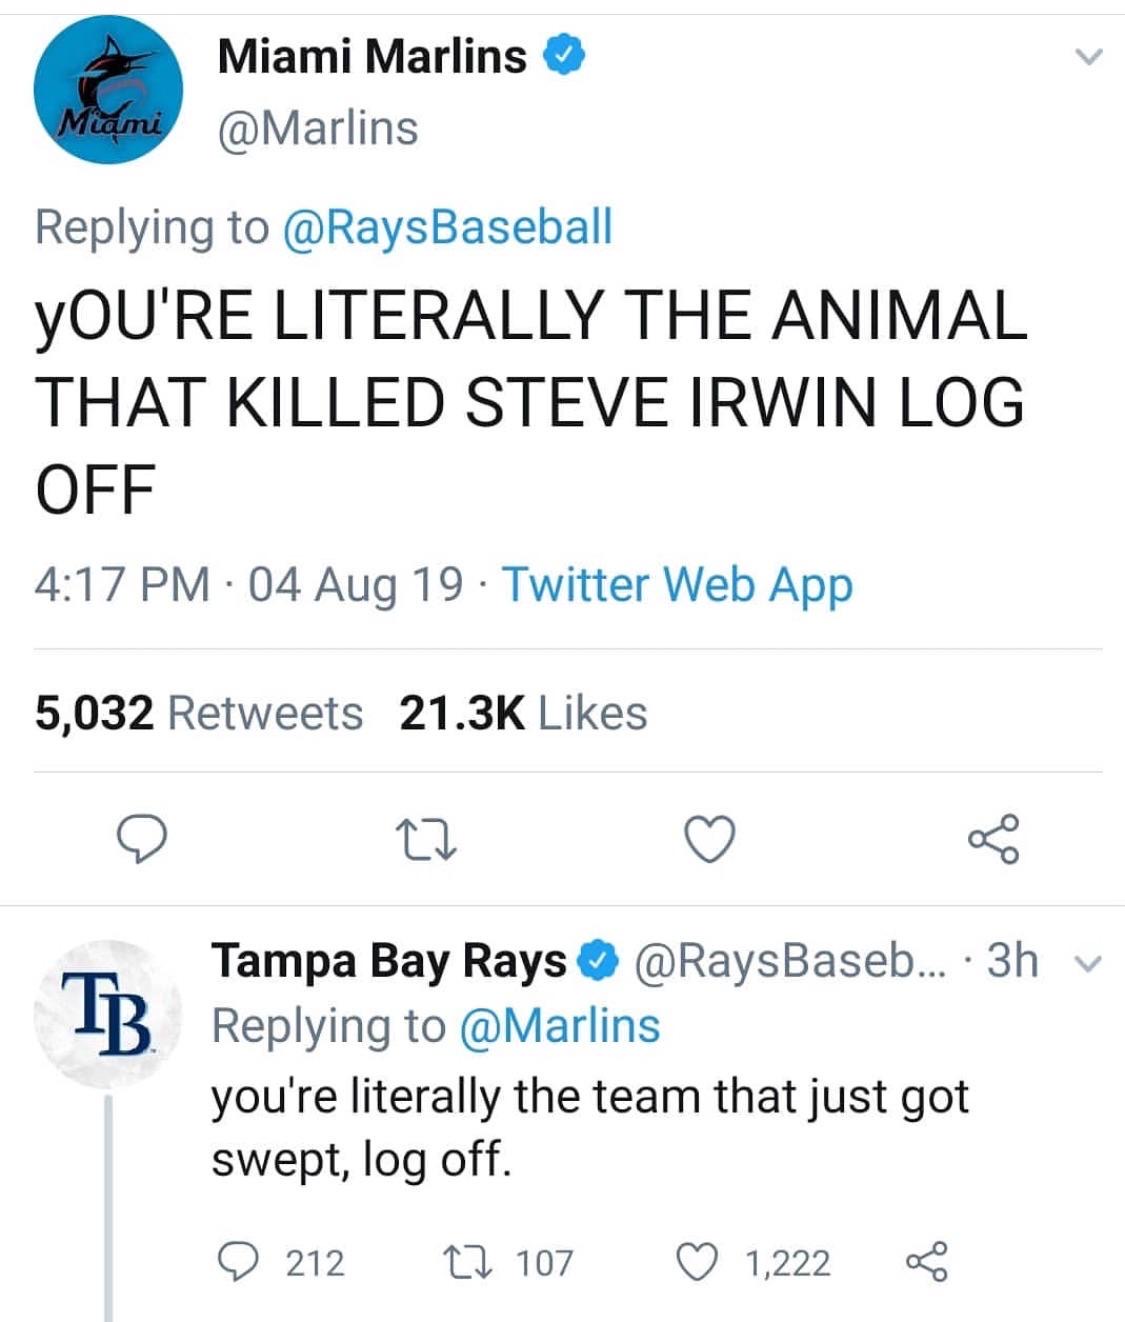 number - Miami Marlins Miami You'Re Literally The Animal That Killed Steve Irwin Log Off 04 Aug 19. Twitter Web App 5,032 Tampa Bay Rays ... 3h you're literally the team that just got swept, log off. D 212 22 107 1,222 8